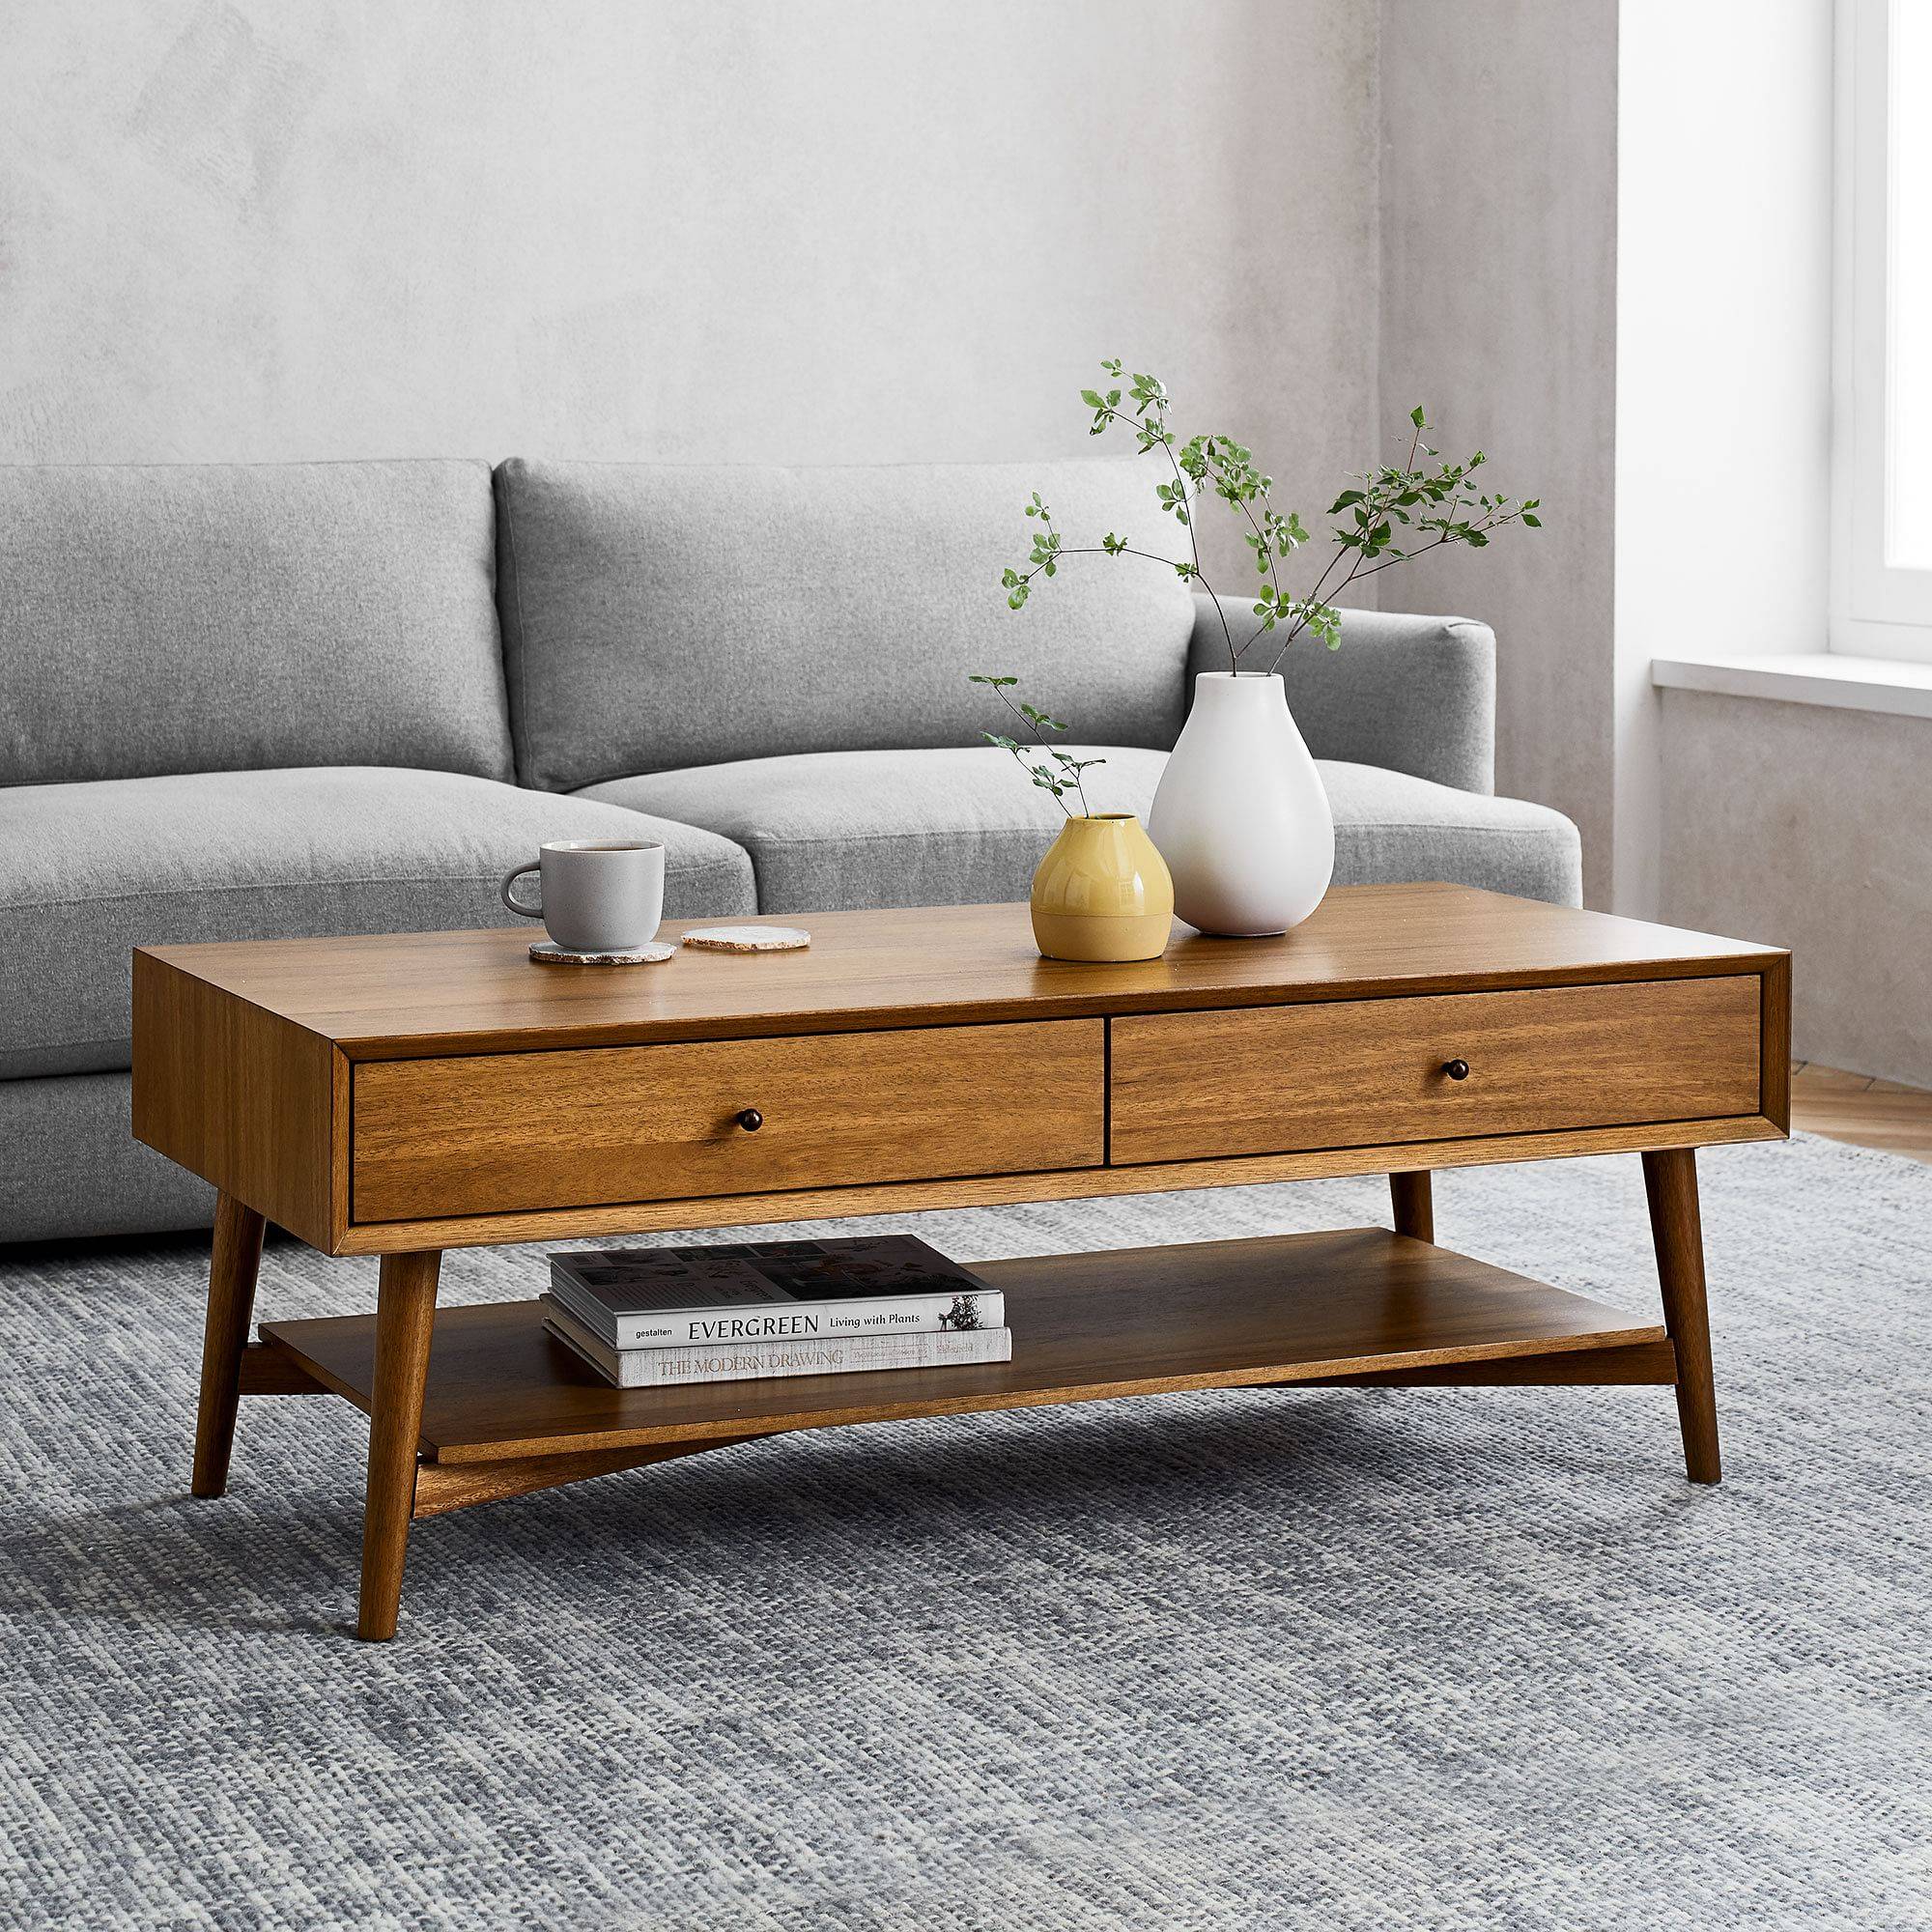 Long wooden coffee table in a boho style living room.